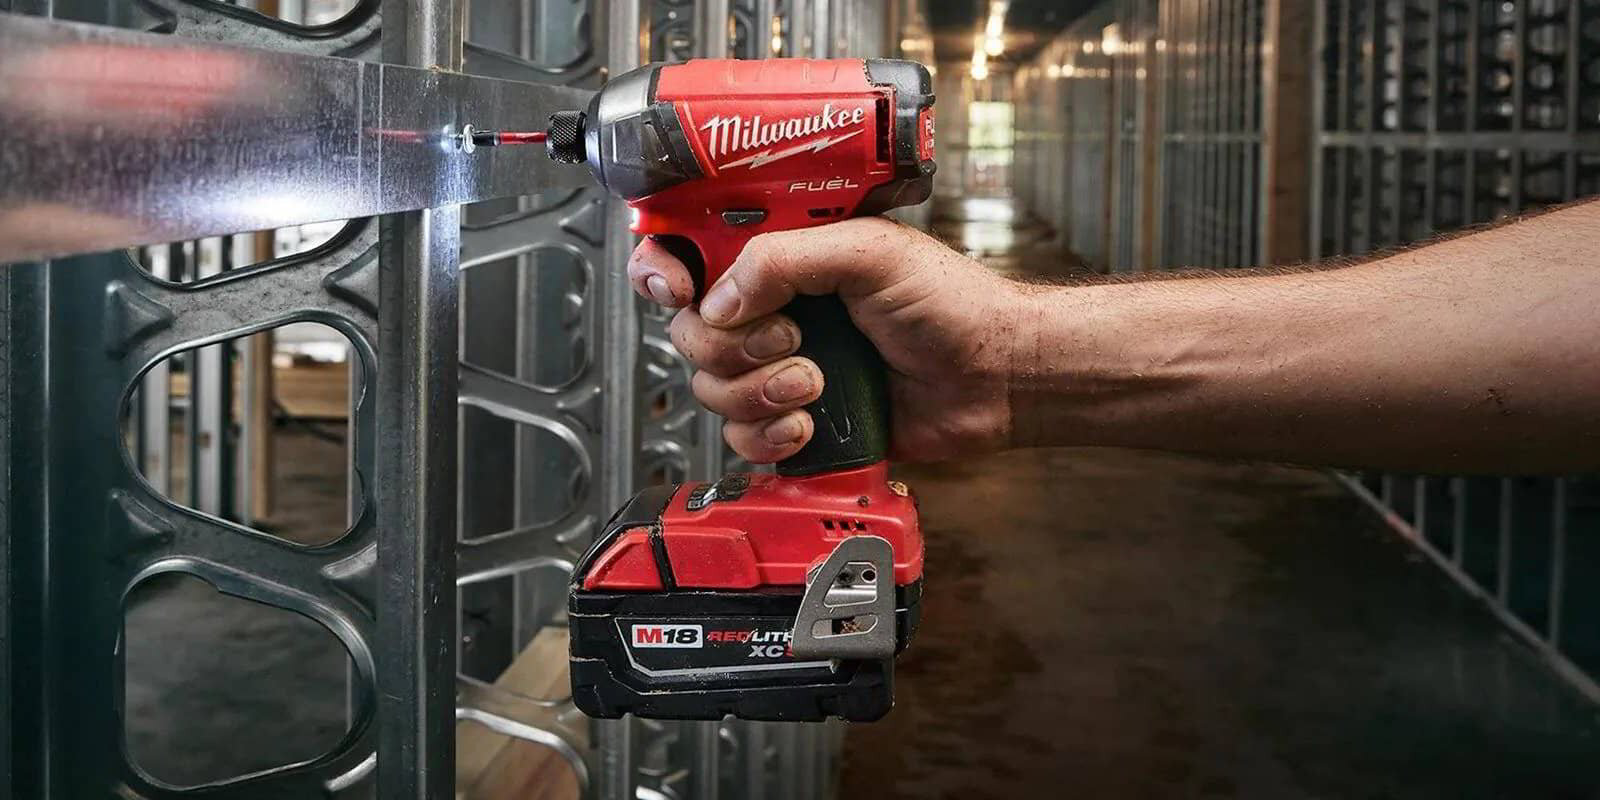 2021 S Best Power Tool Brands For Homeowners And Professionals